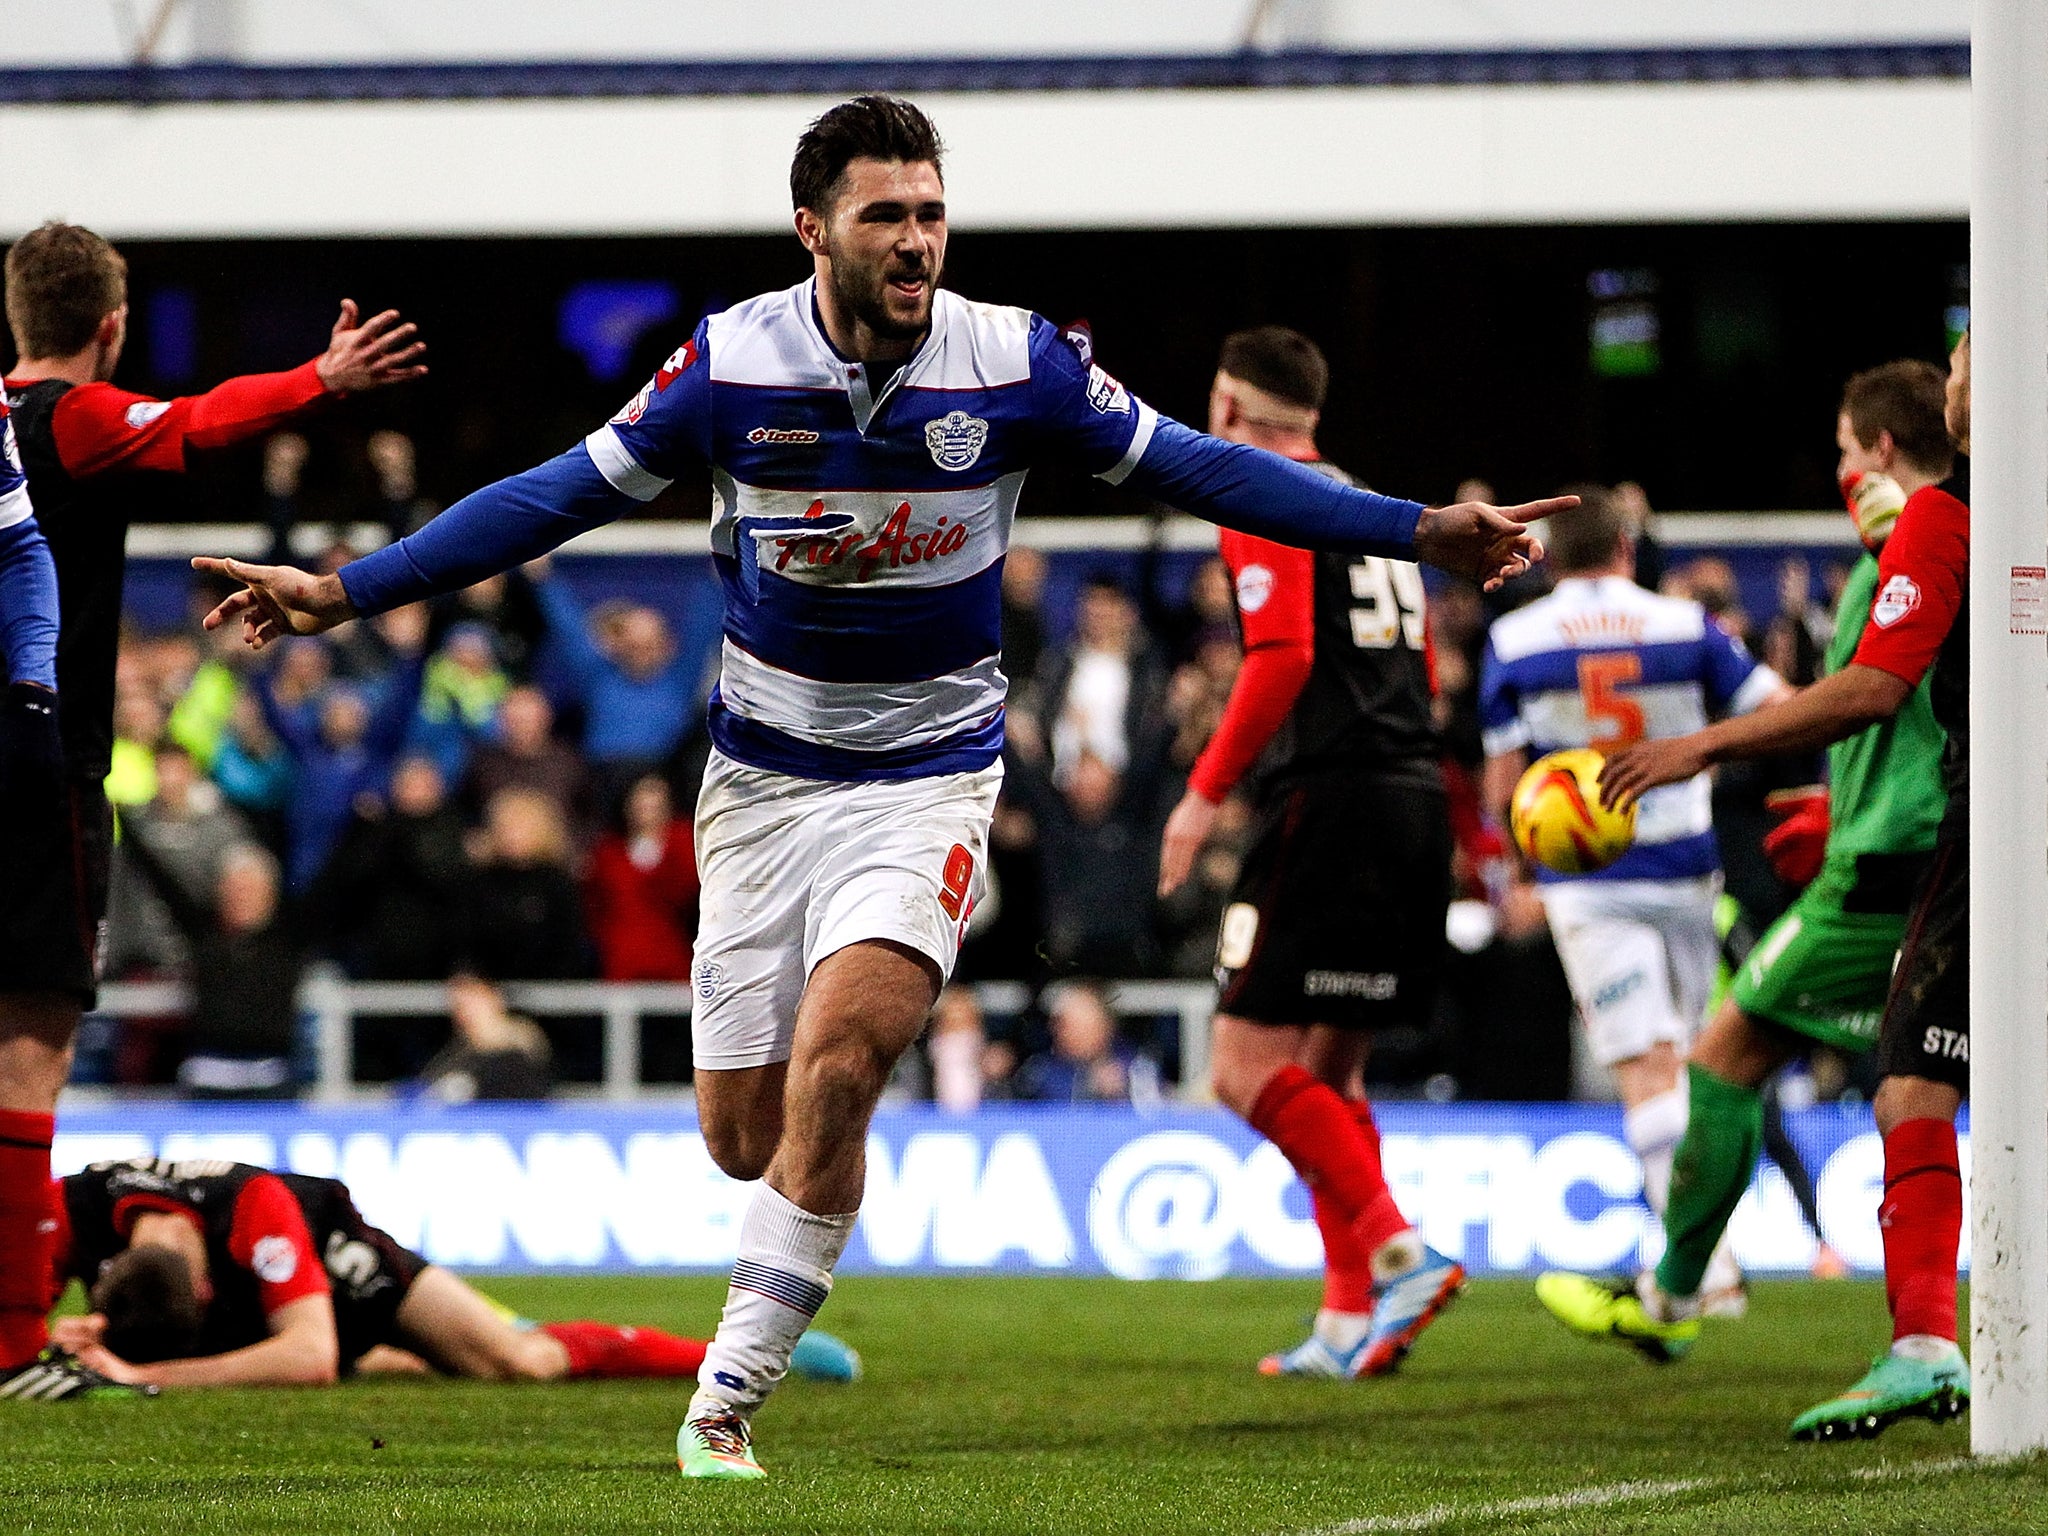 Charlie Austin scored twice to give QPR a 2-1 win over Huddersfield